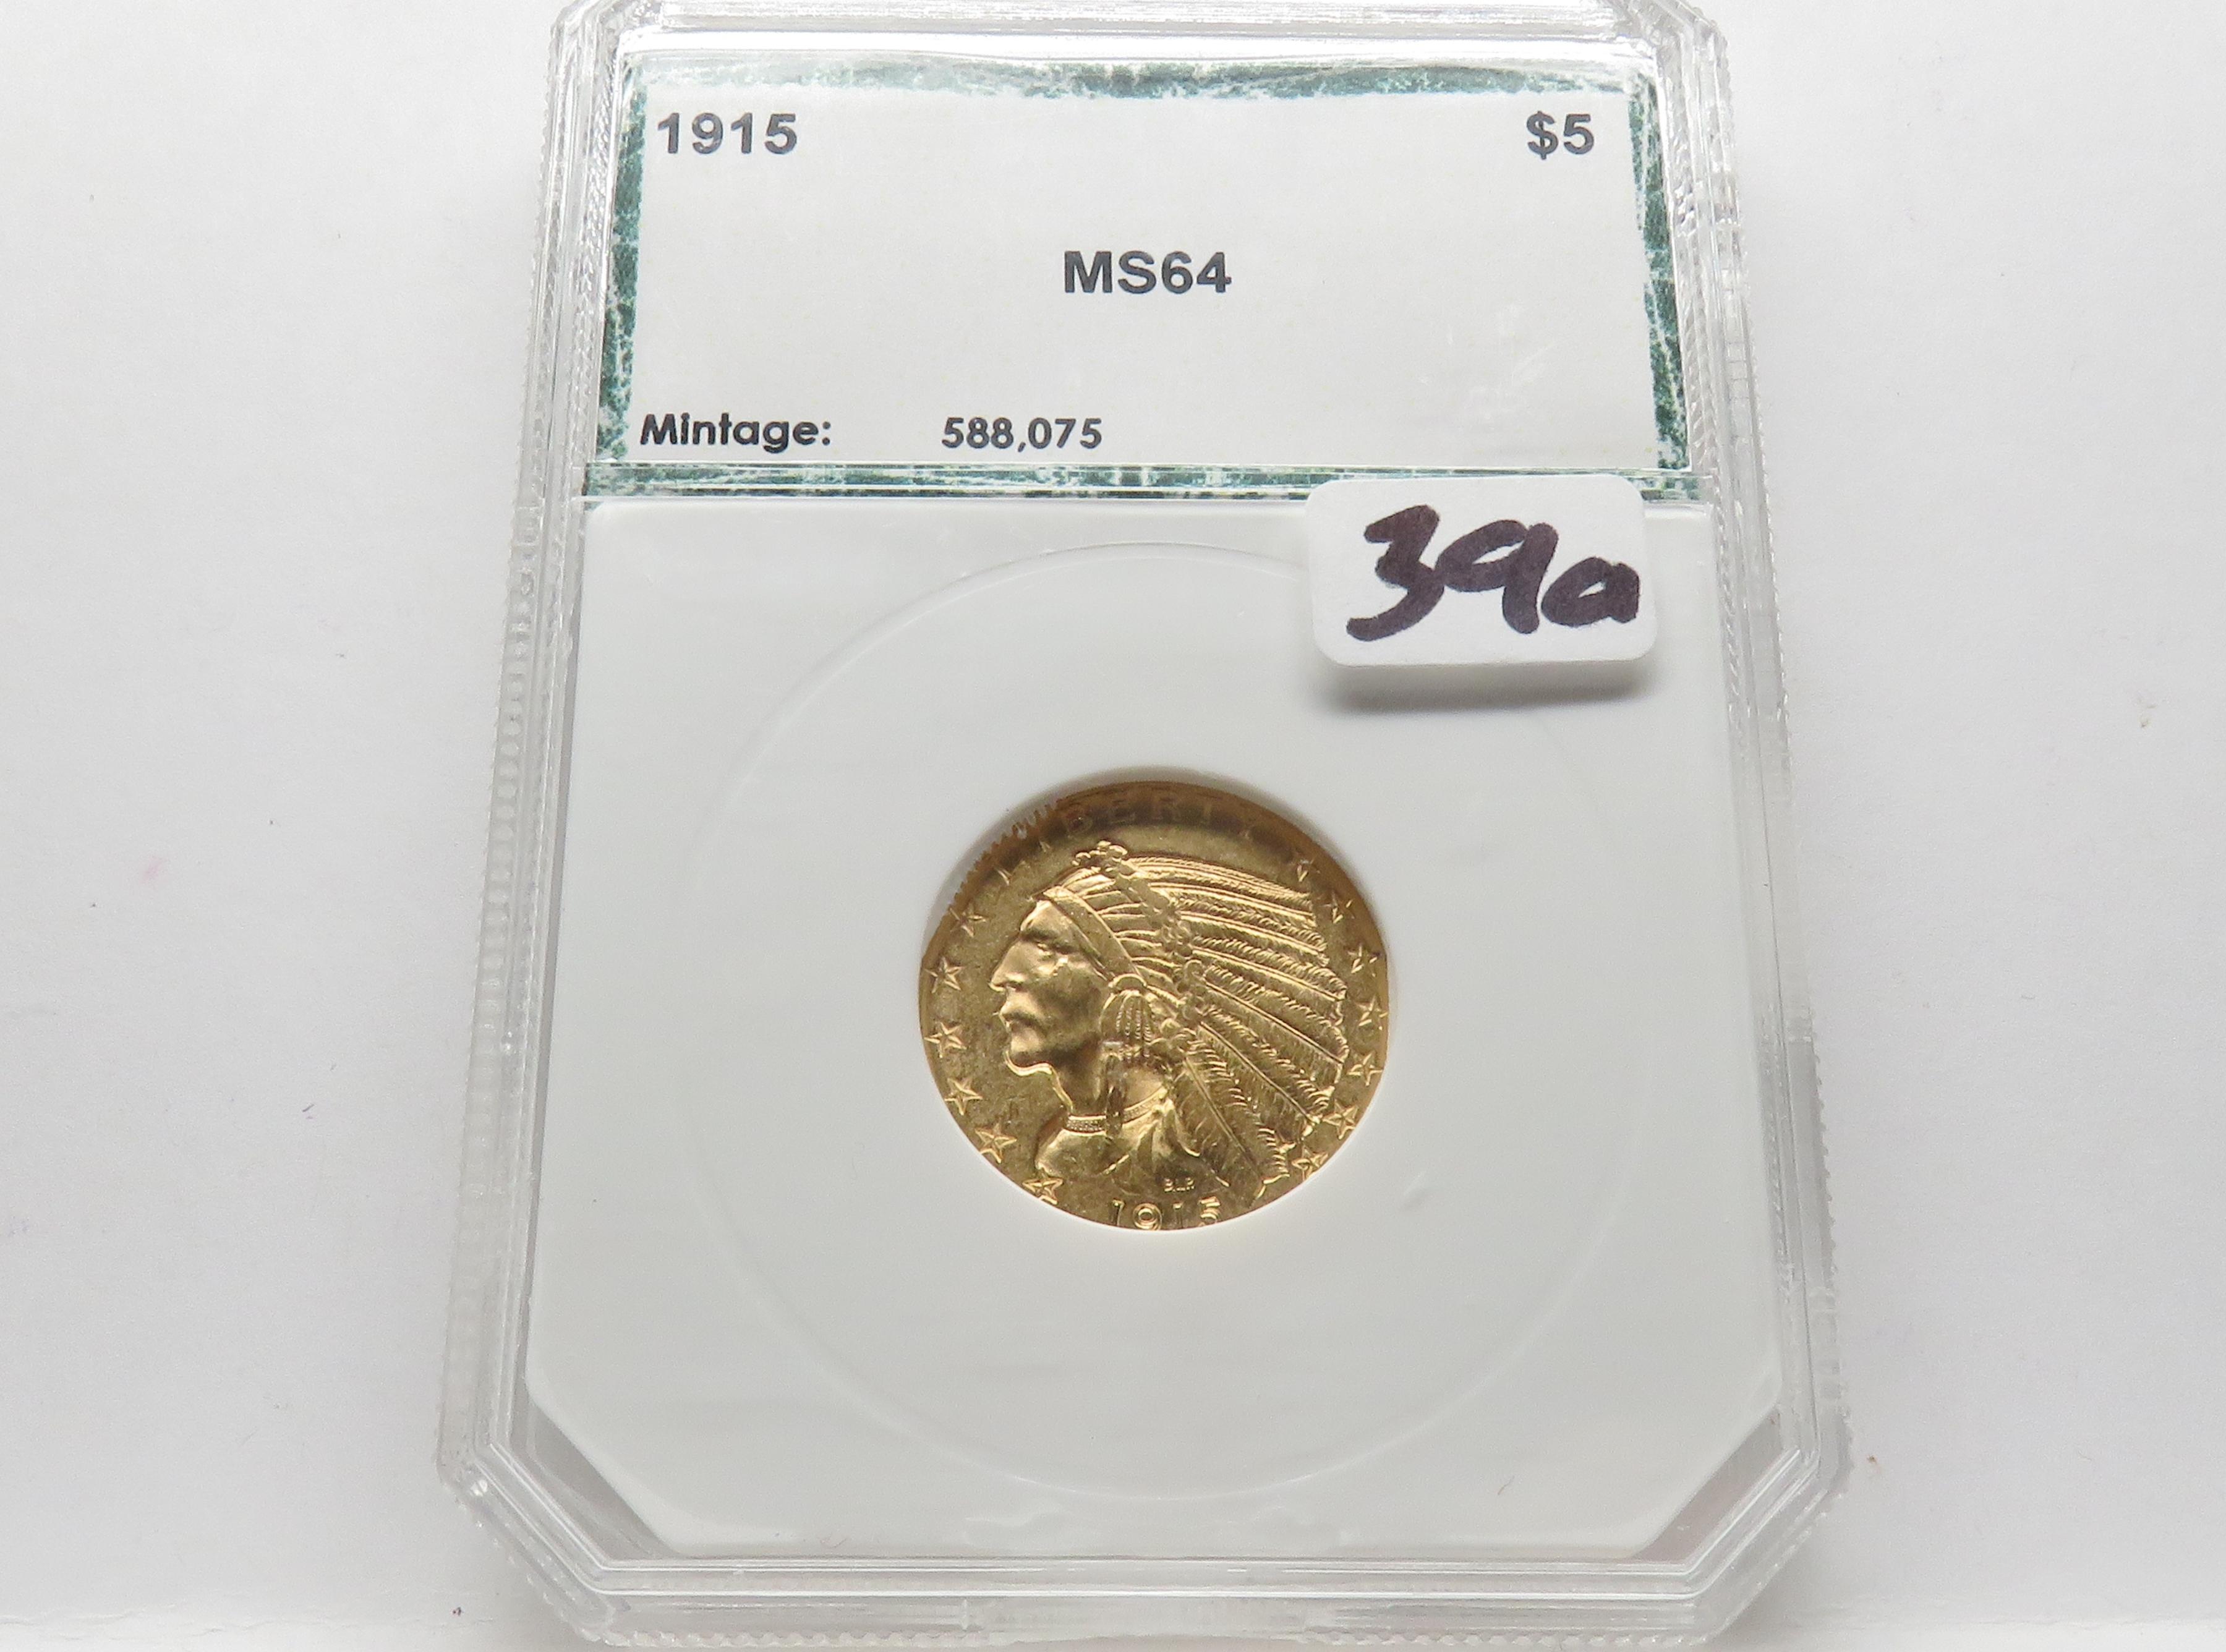 $5 Gold Indian 1915 PCI MS64, green label